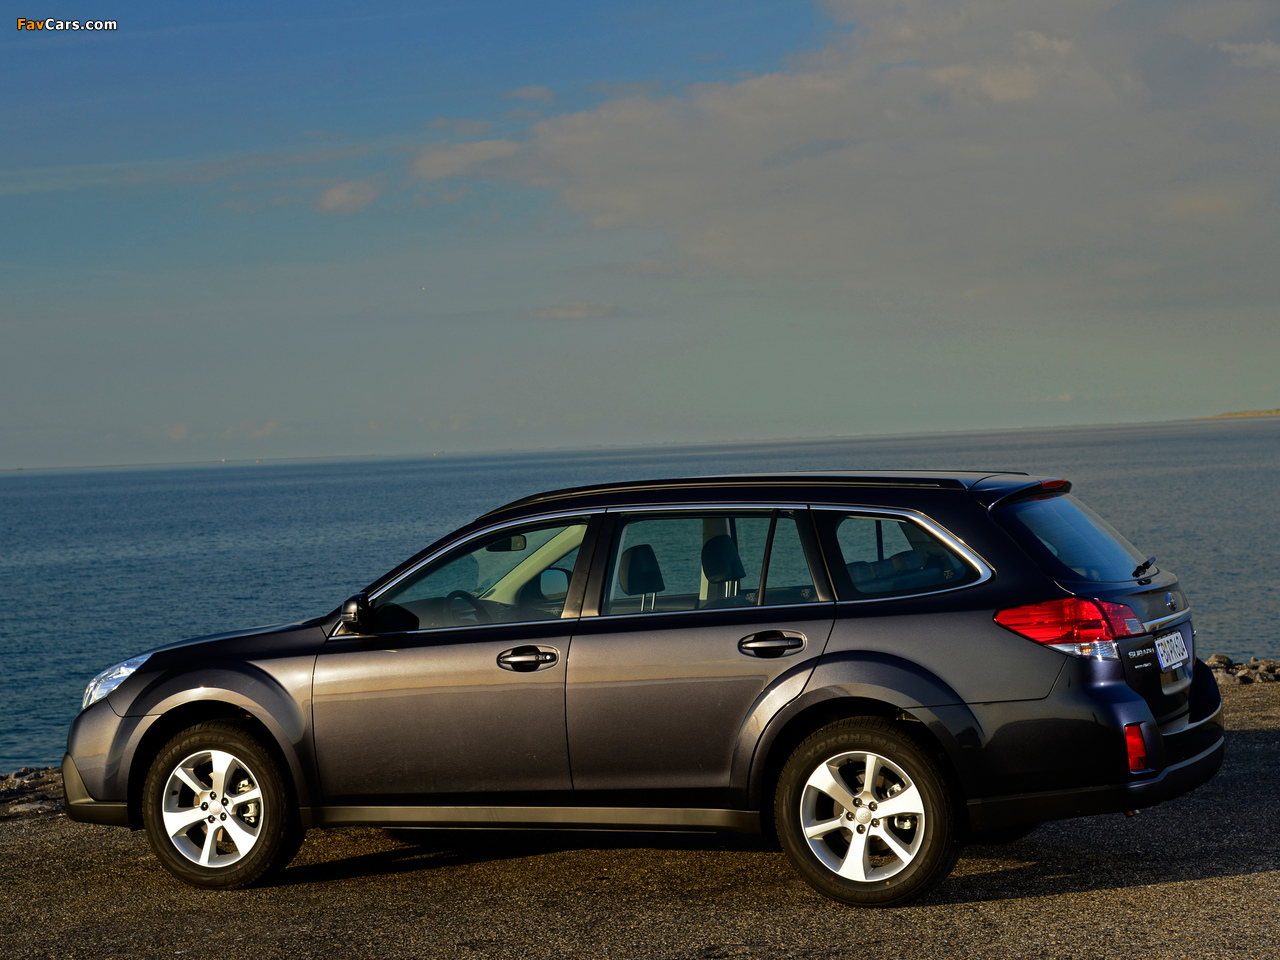 Subaru Outback 2.5i (BR) 2012 pictures (1280 x 960)